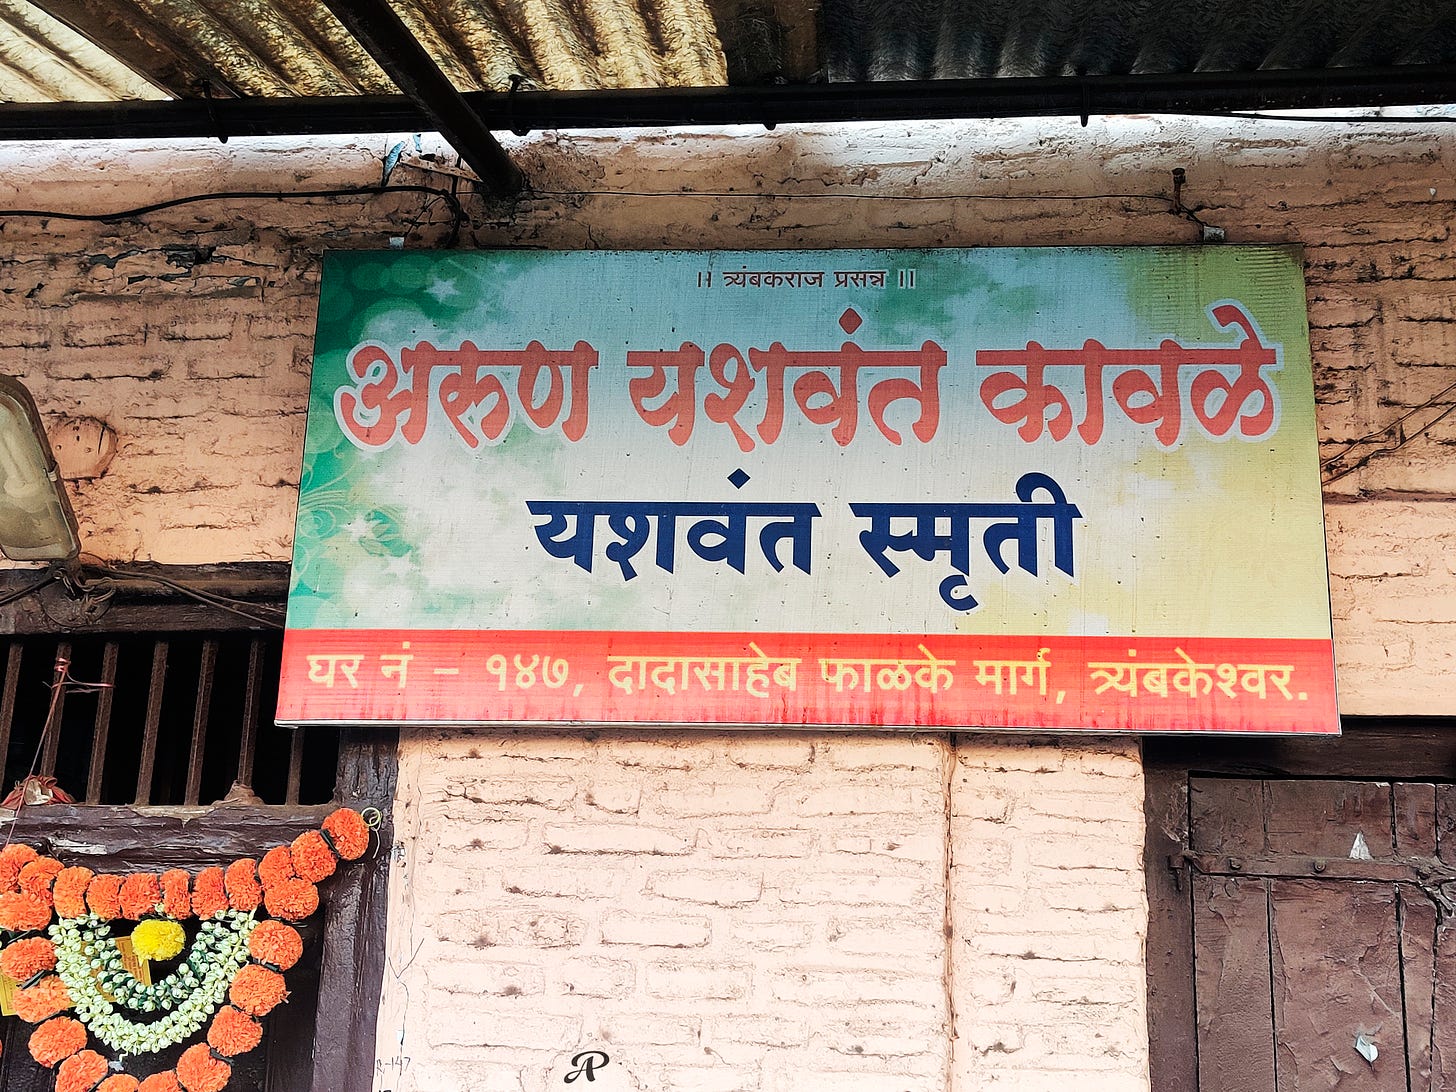 A street named after Dadashaeb Phalke in the town of Trimbakeshwar where he was born